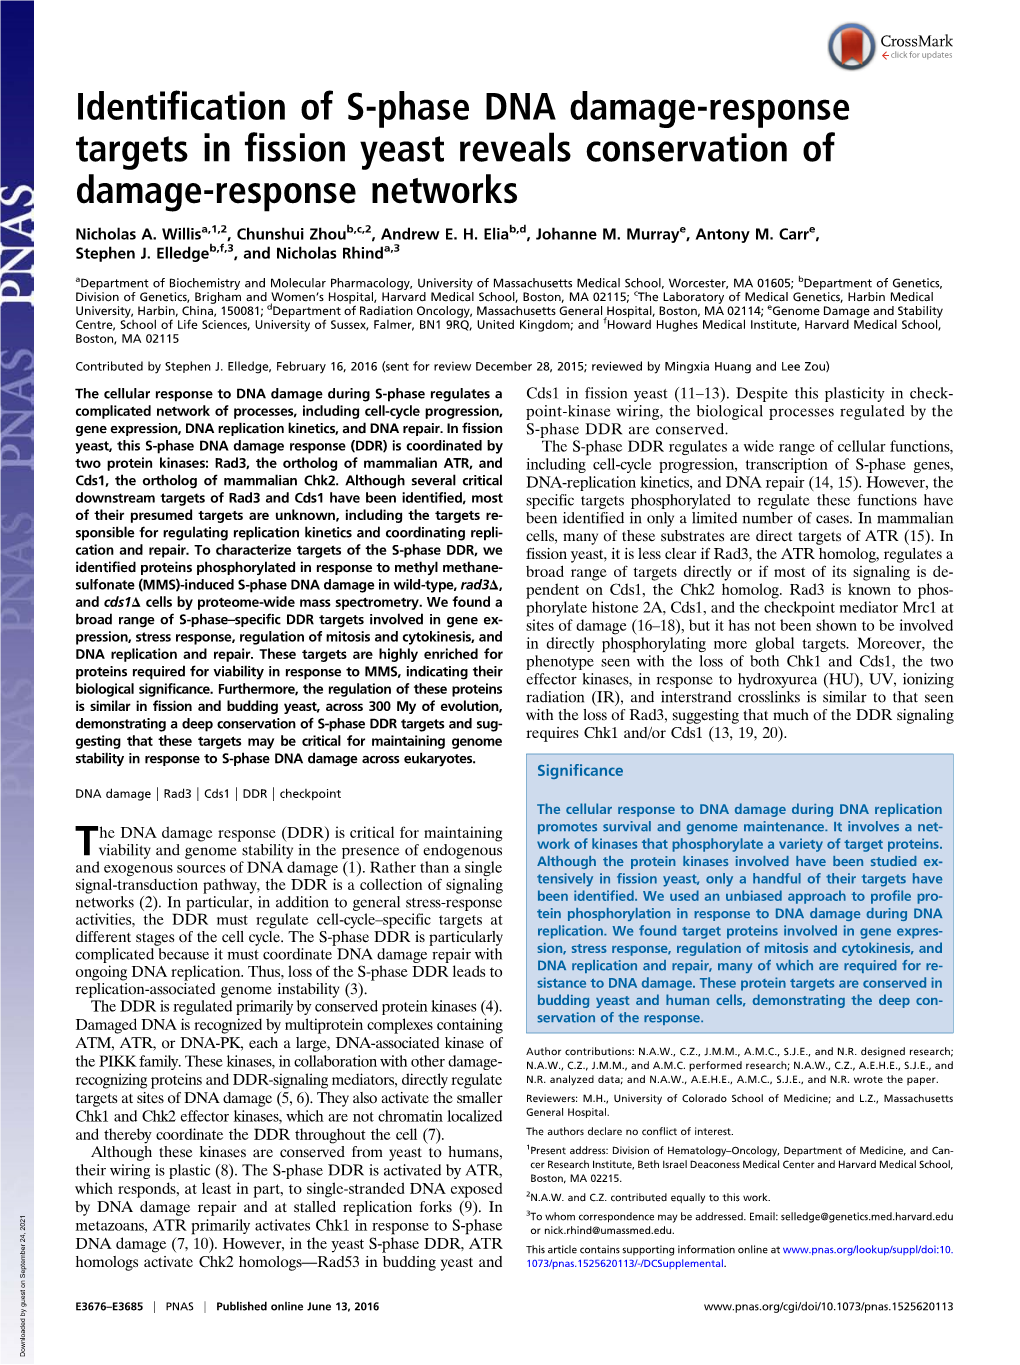 Identification of S-Phase DNA Damage-Response Targets in Fission Yeast Reveals Conservation of Damage-Response Networks